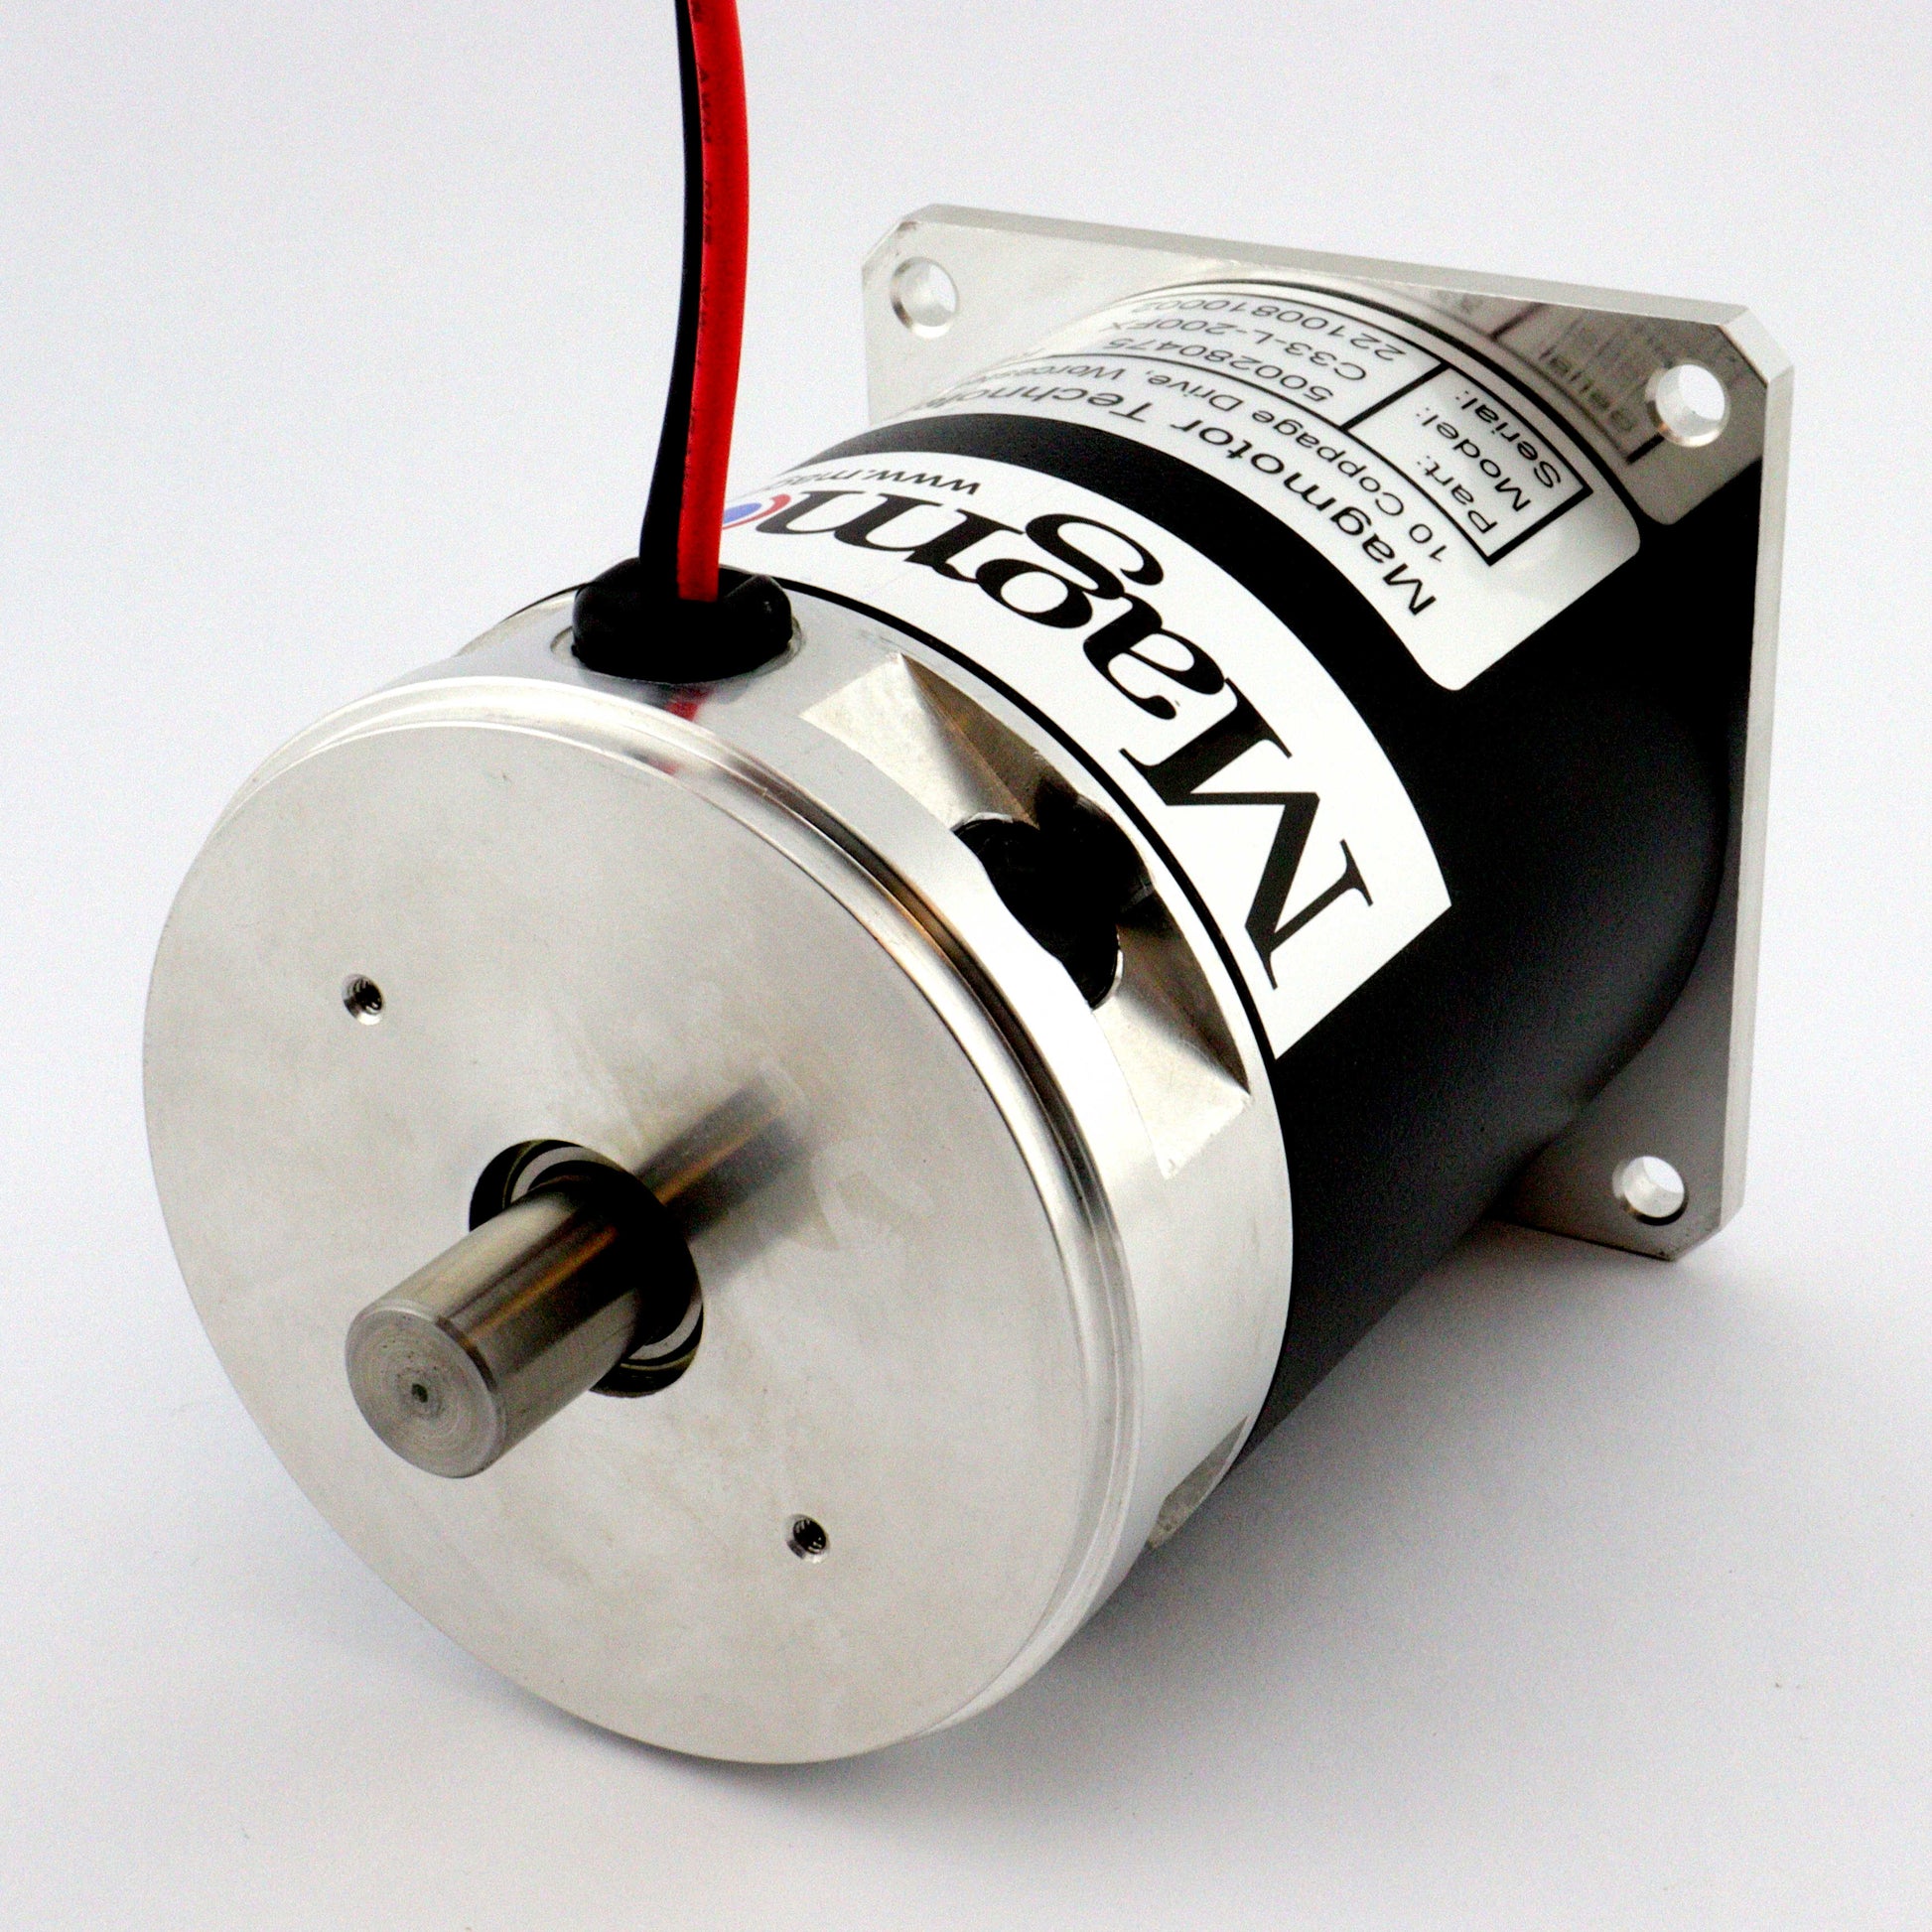 Magmotor C33-I-200FX Brushed Motor 500280475 Rear View